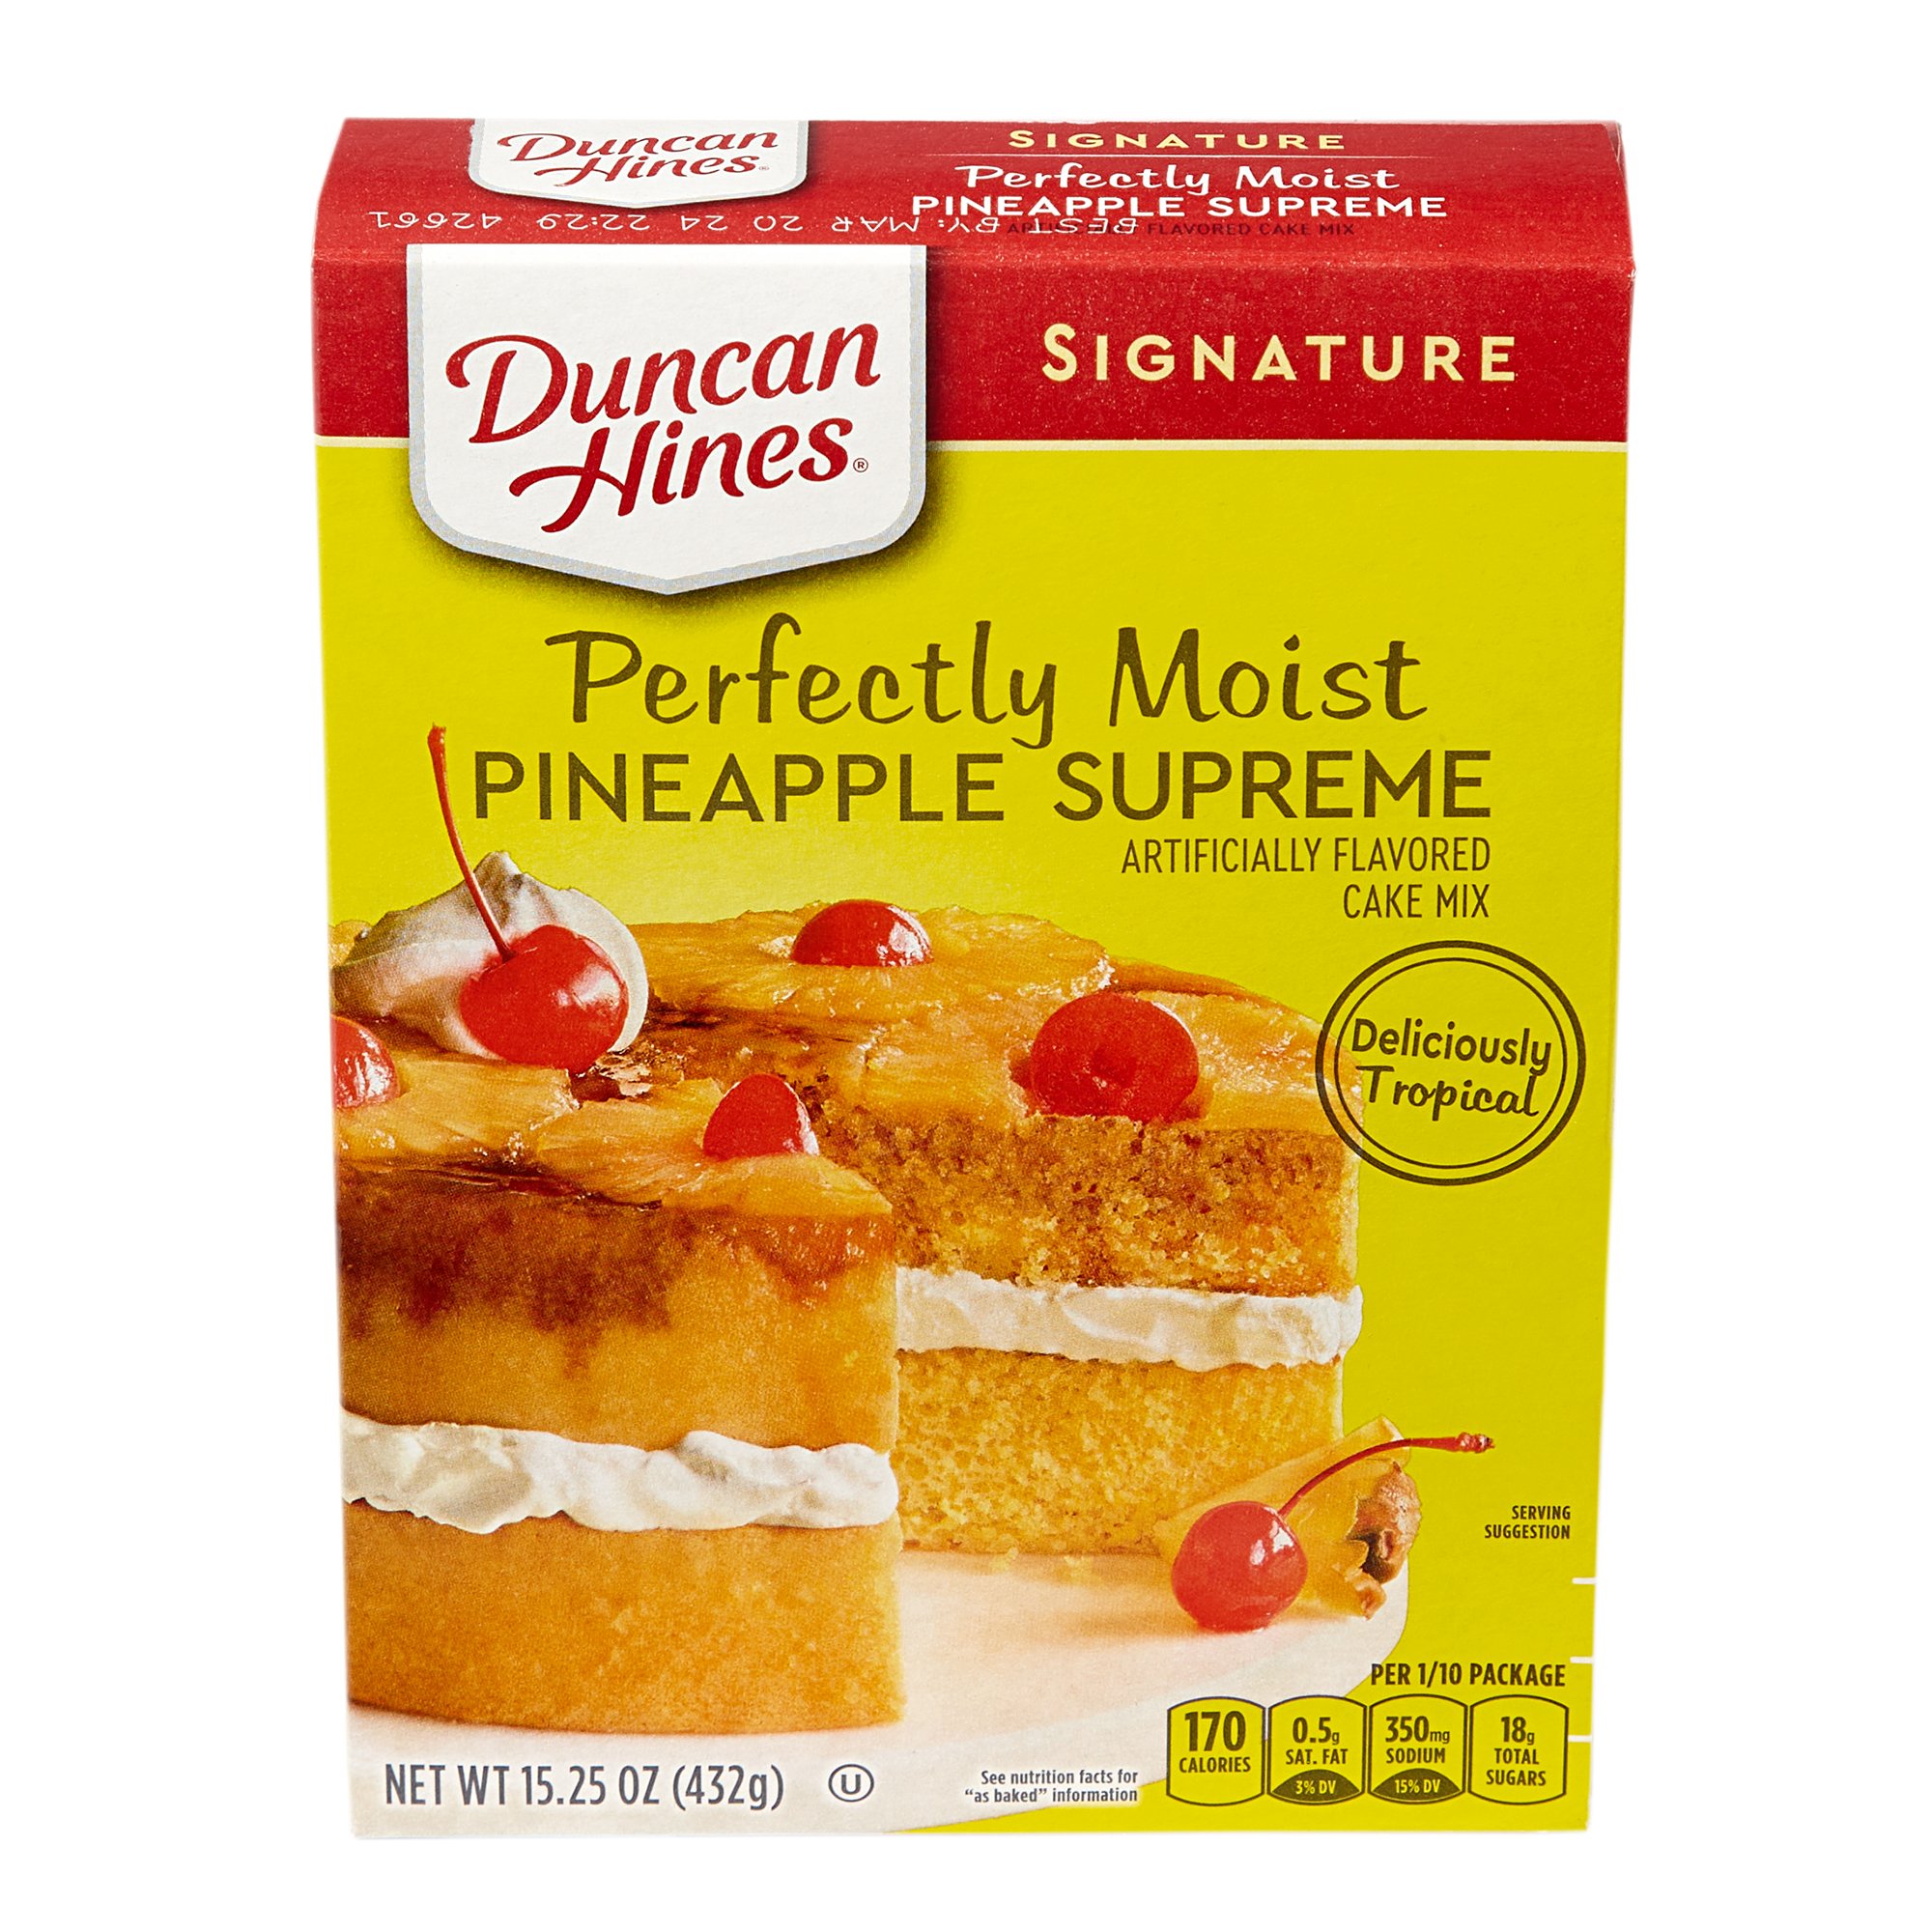 Duncan Hines Signature Perfectly Moist Pineapple Supreme Cake Mix 